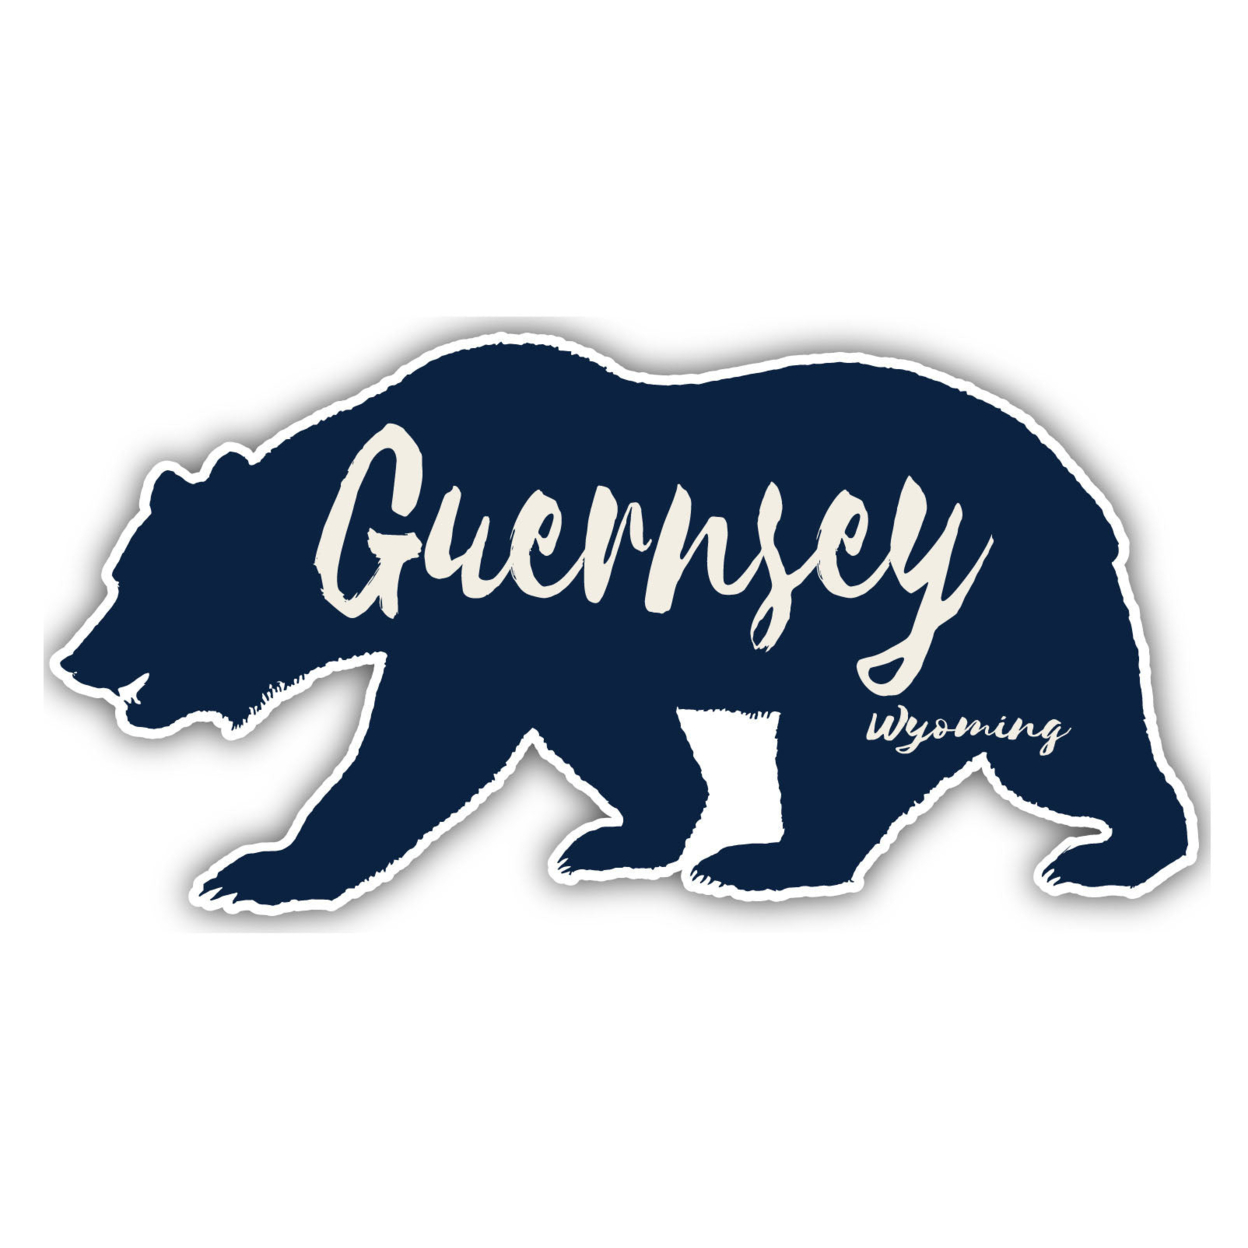 Guernsey Wyoming Souvenir Decorative Stickers (Choose Theme And Size) - 4-Pack, 8-Inch, Bear